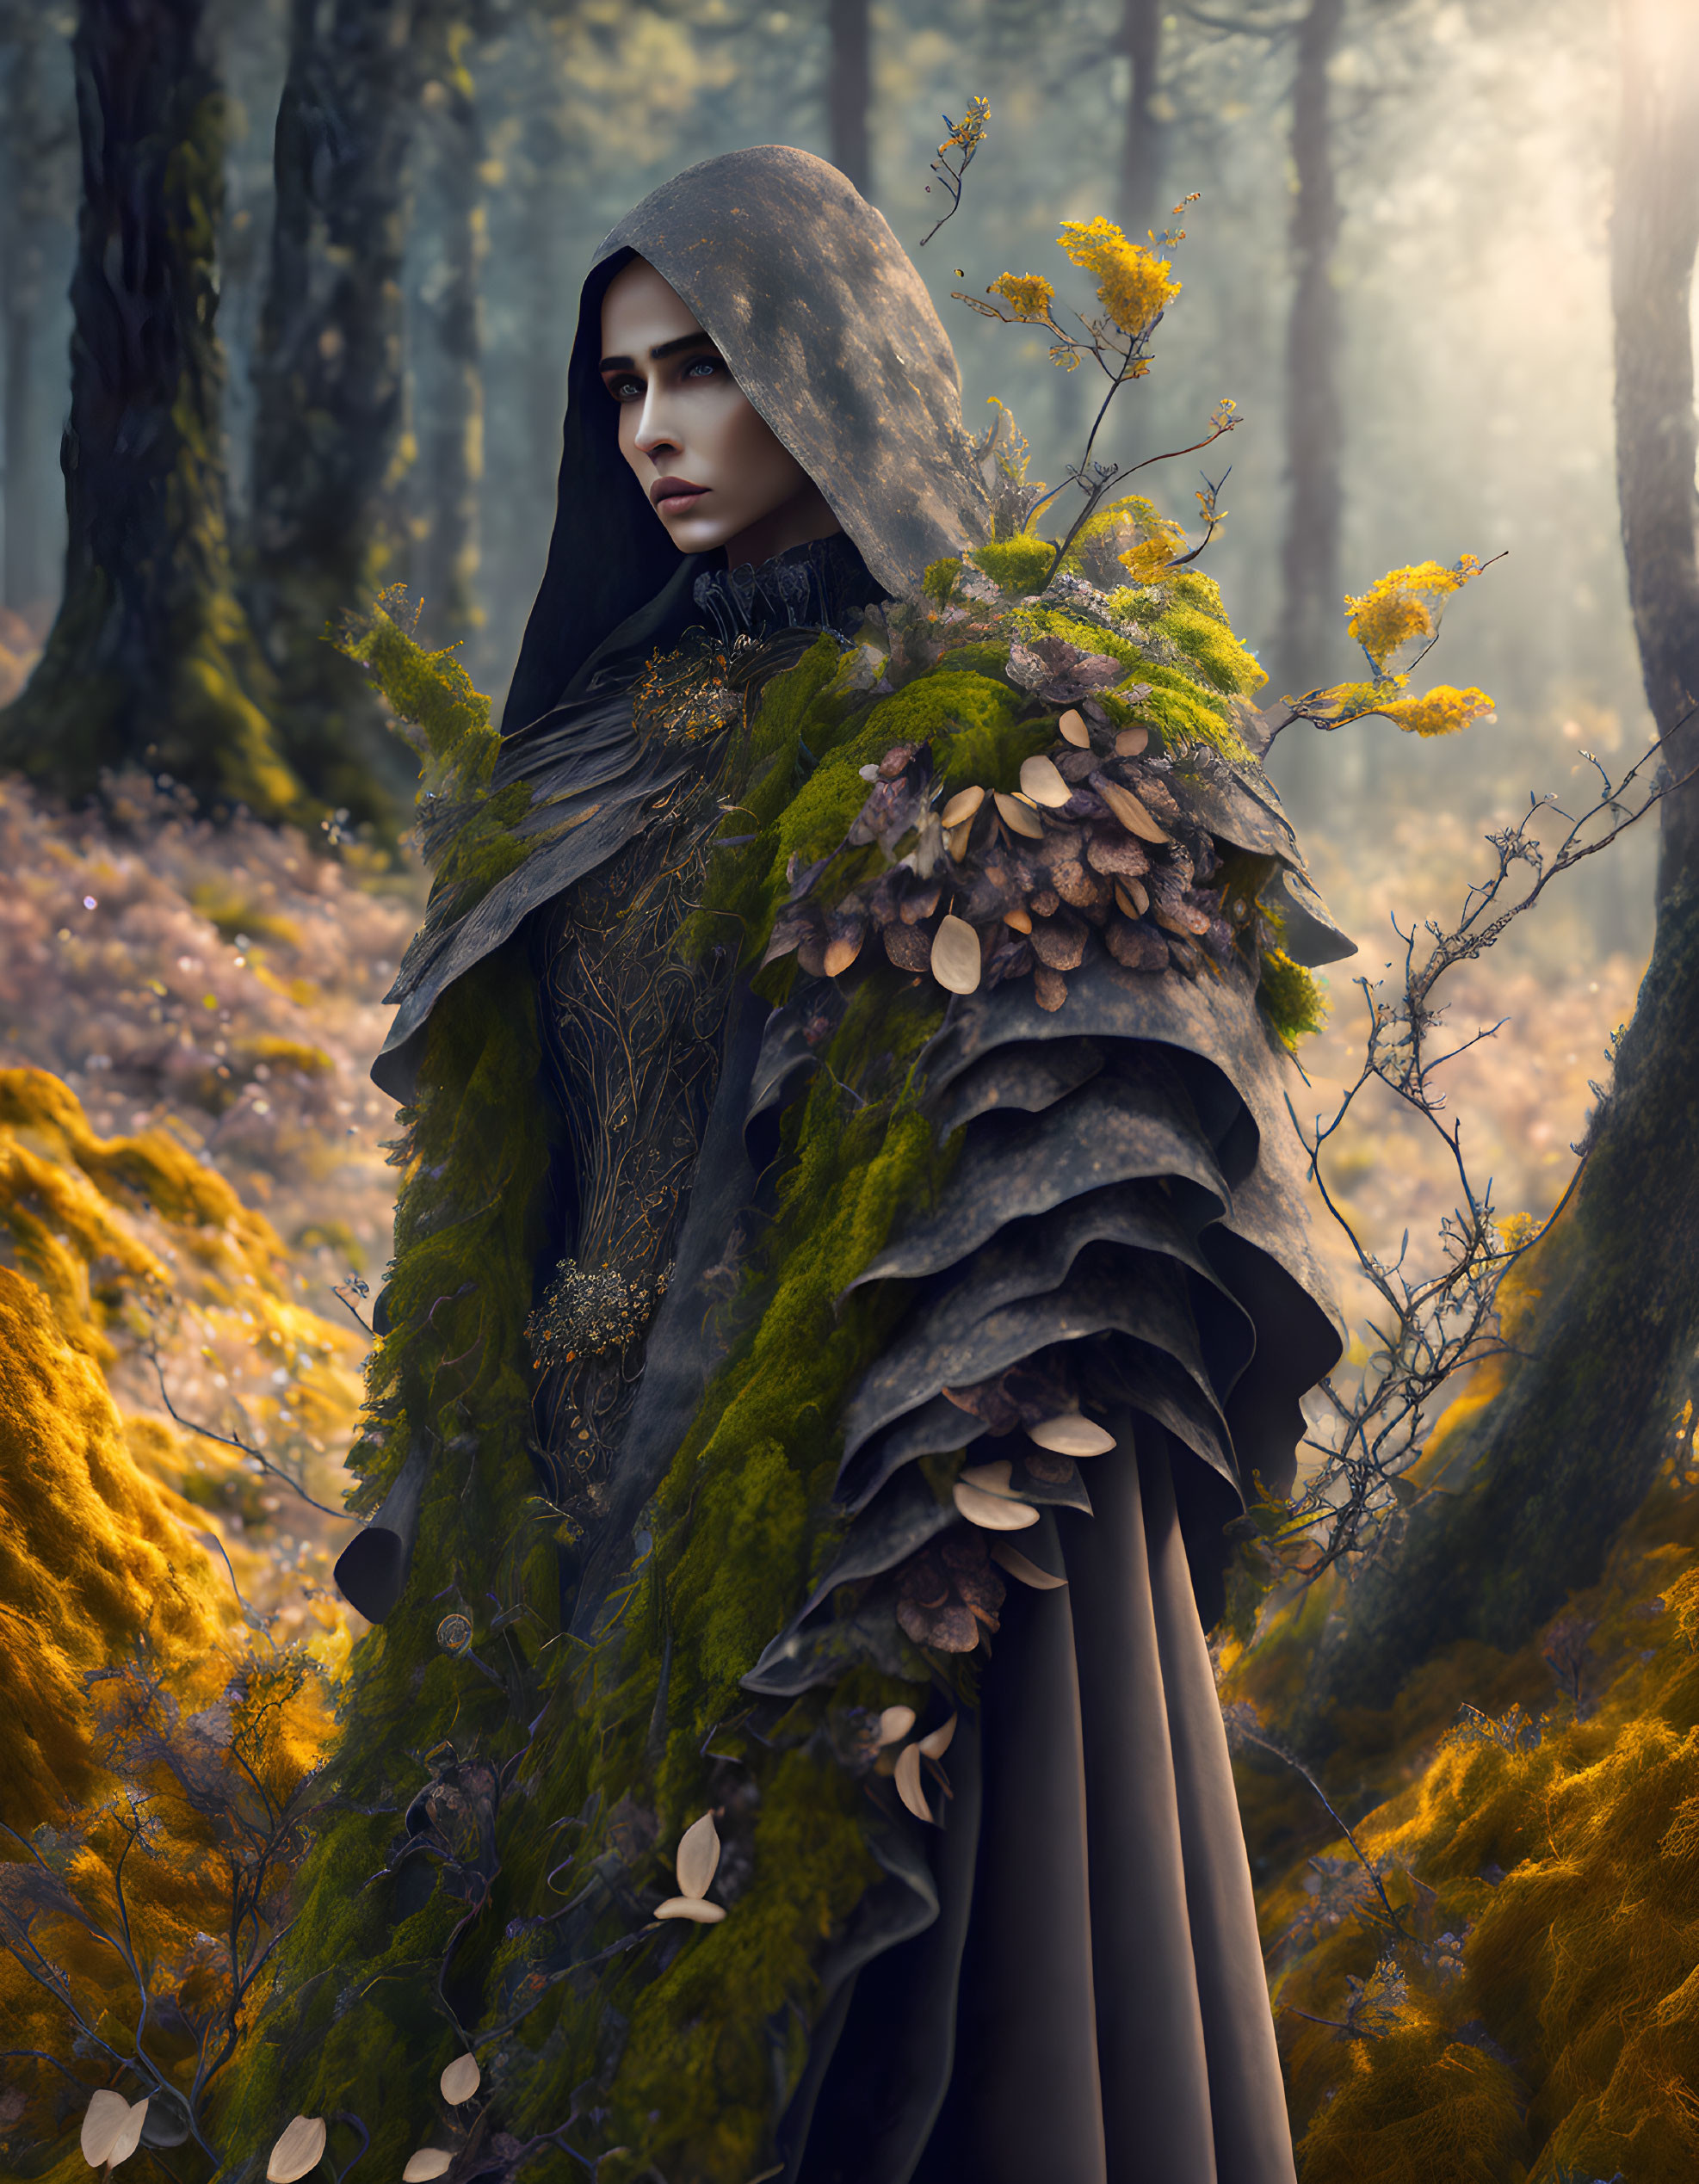 Person in earth-toned garments surrounded by forest foliage and soft light